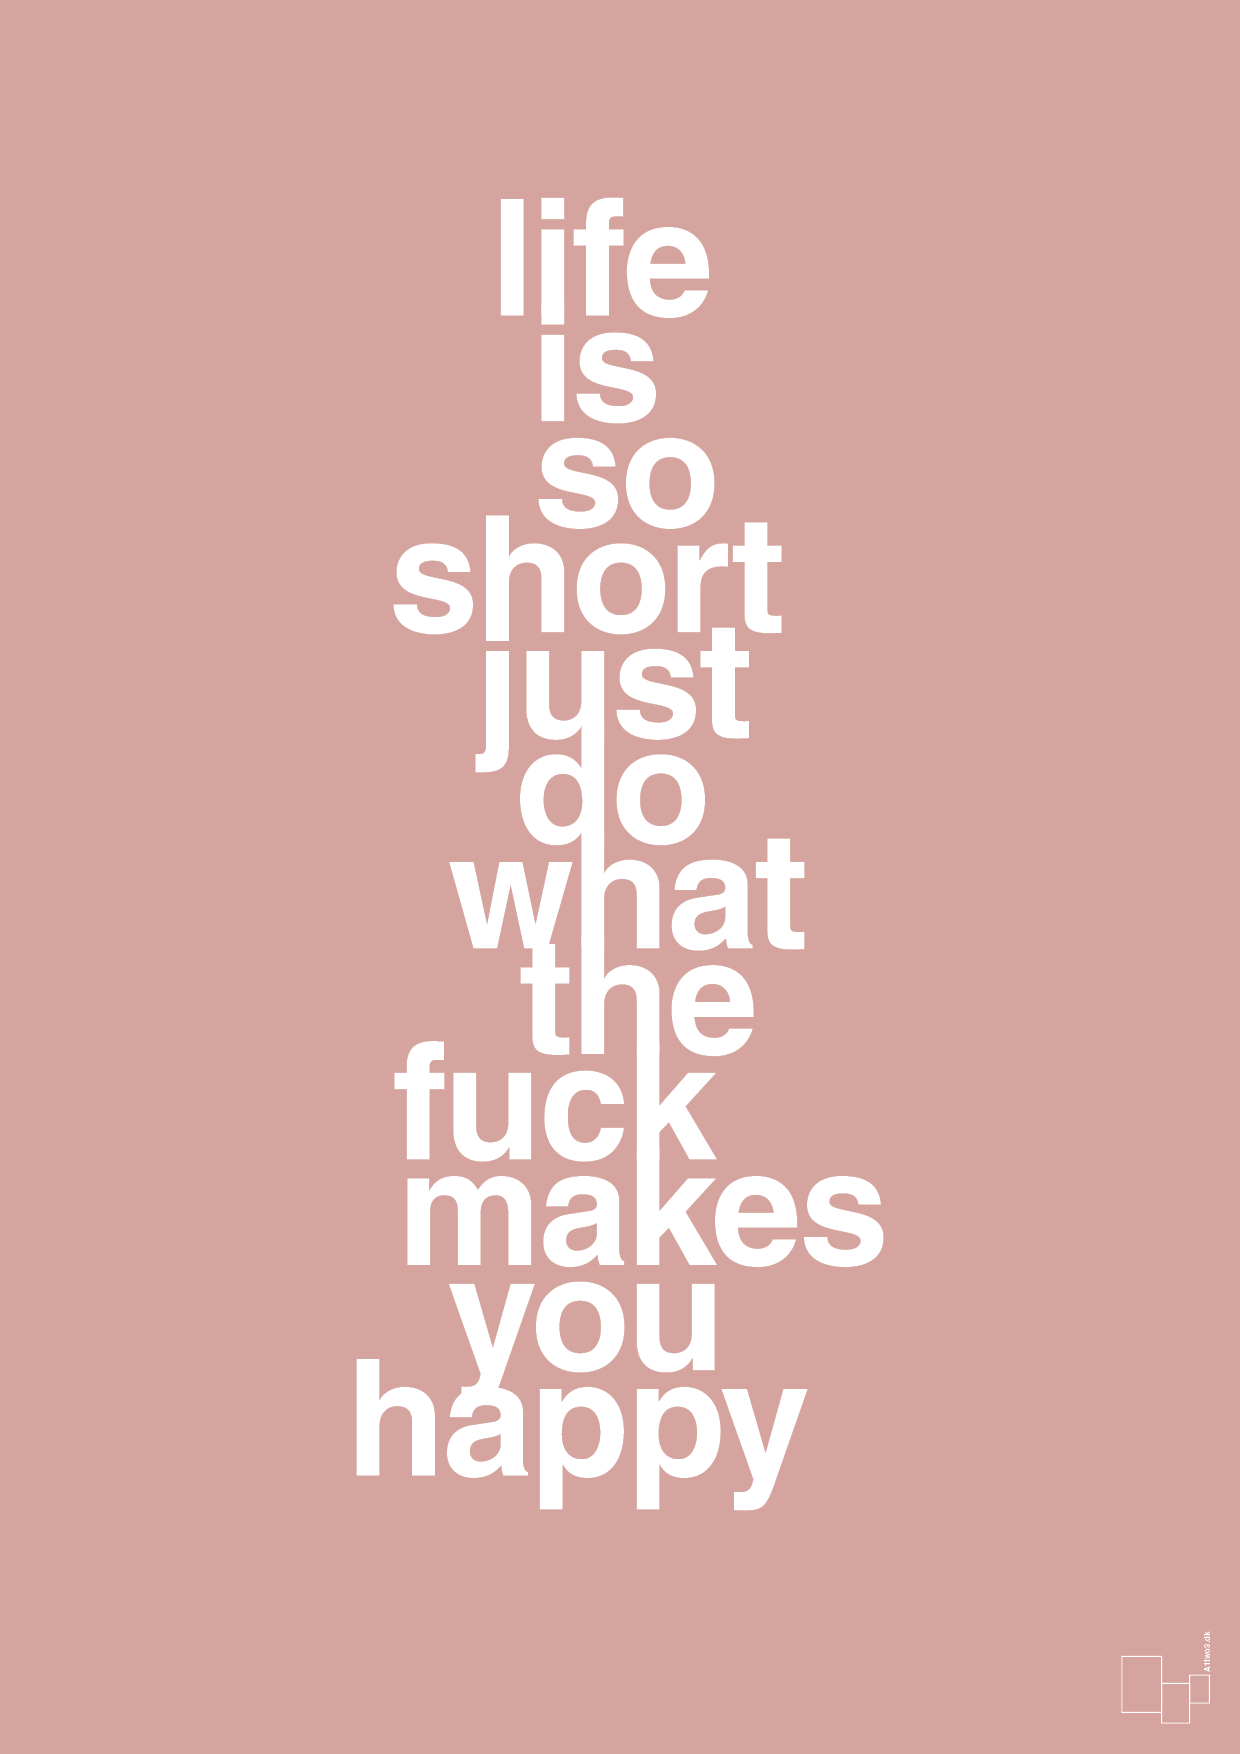 life is so short just do what the fuck makes you happy - Plakat med Ordsprog i Bubble Shell